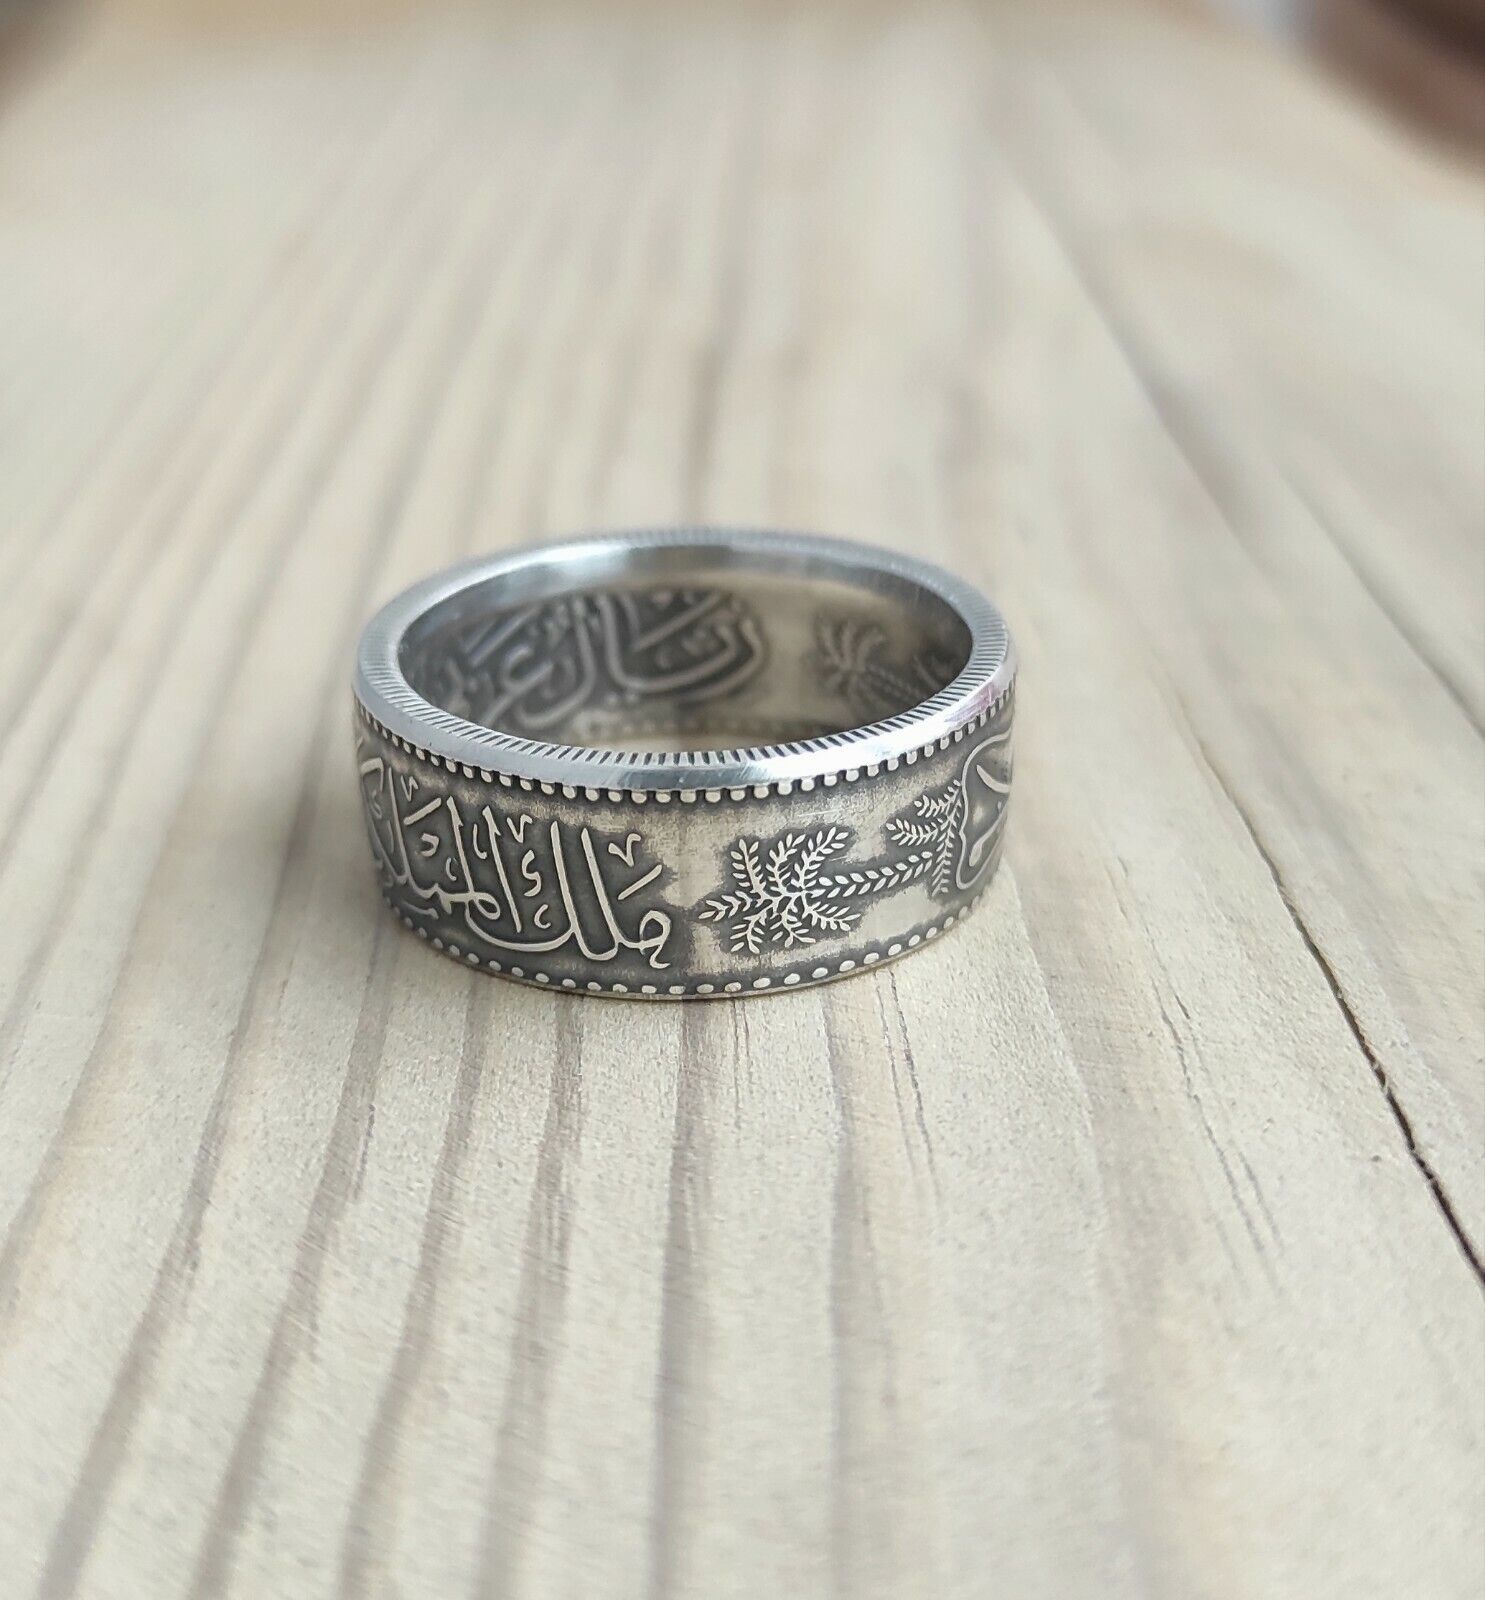 90% Silver Maine Coin Ring - Handmade by Midnight Jo